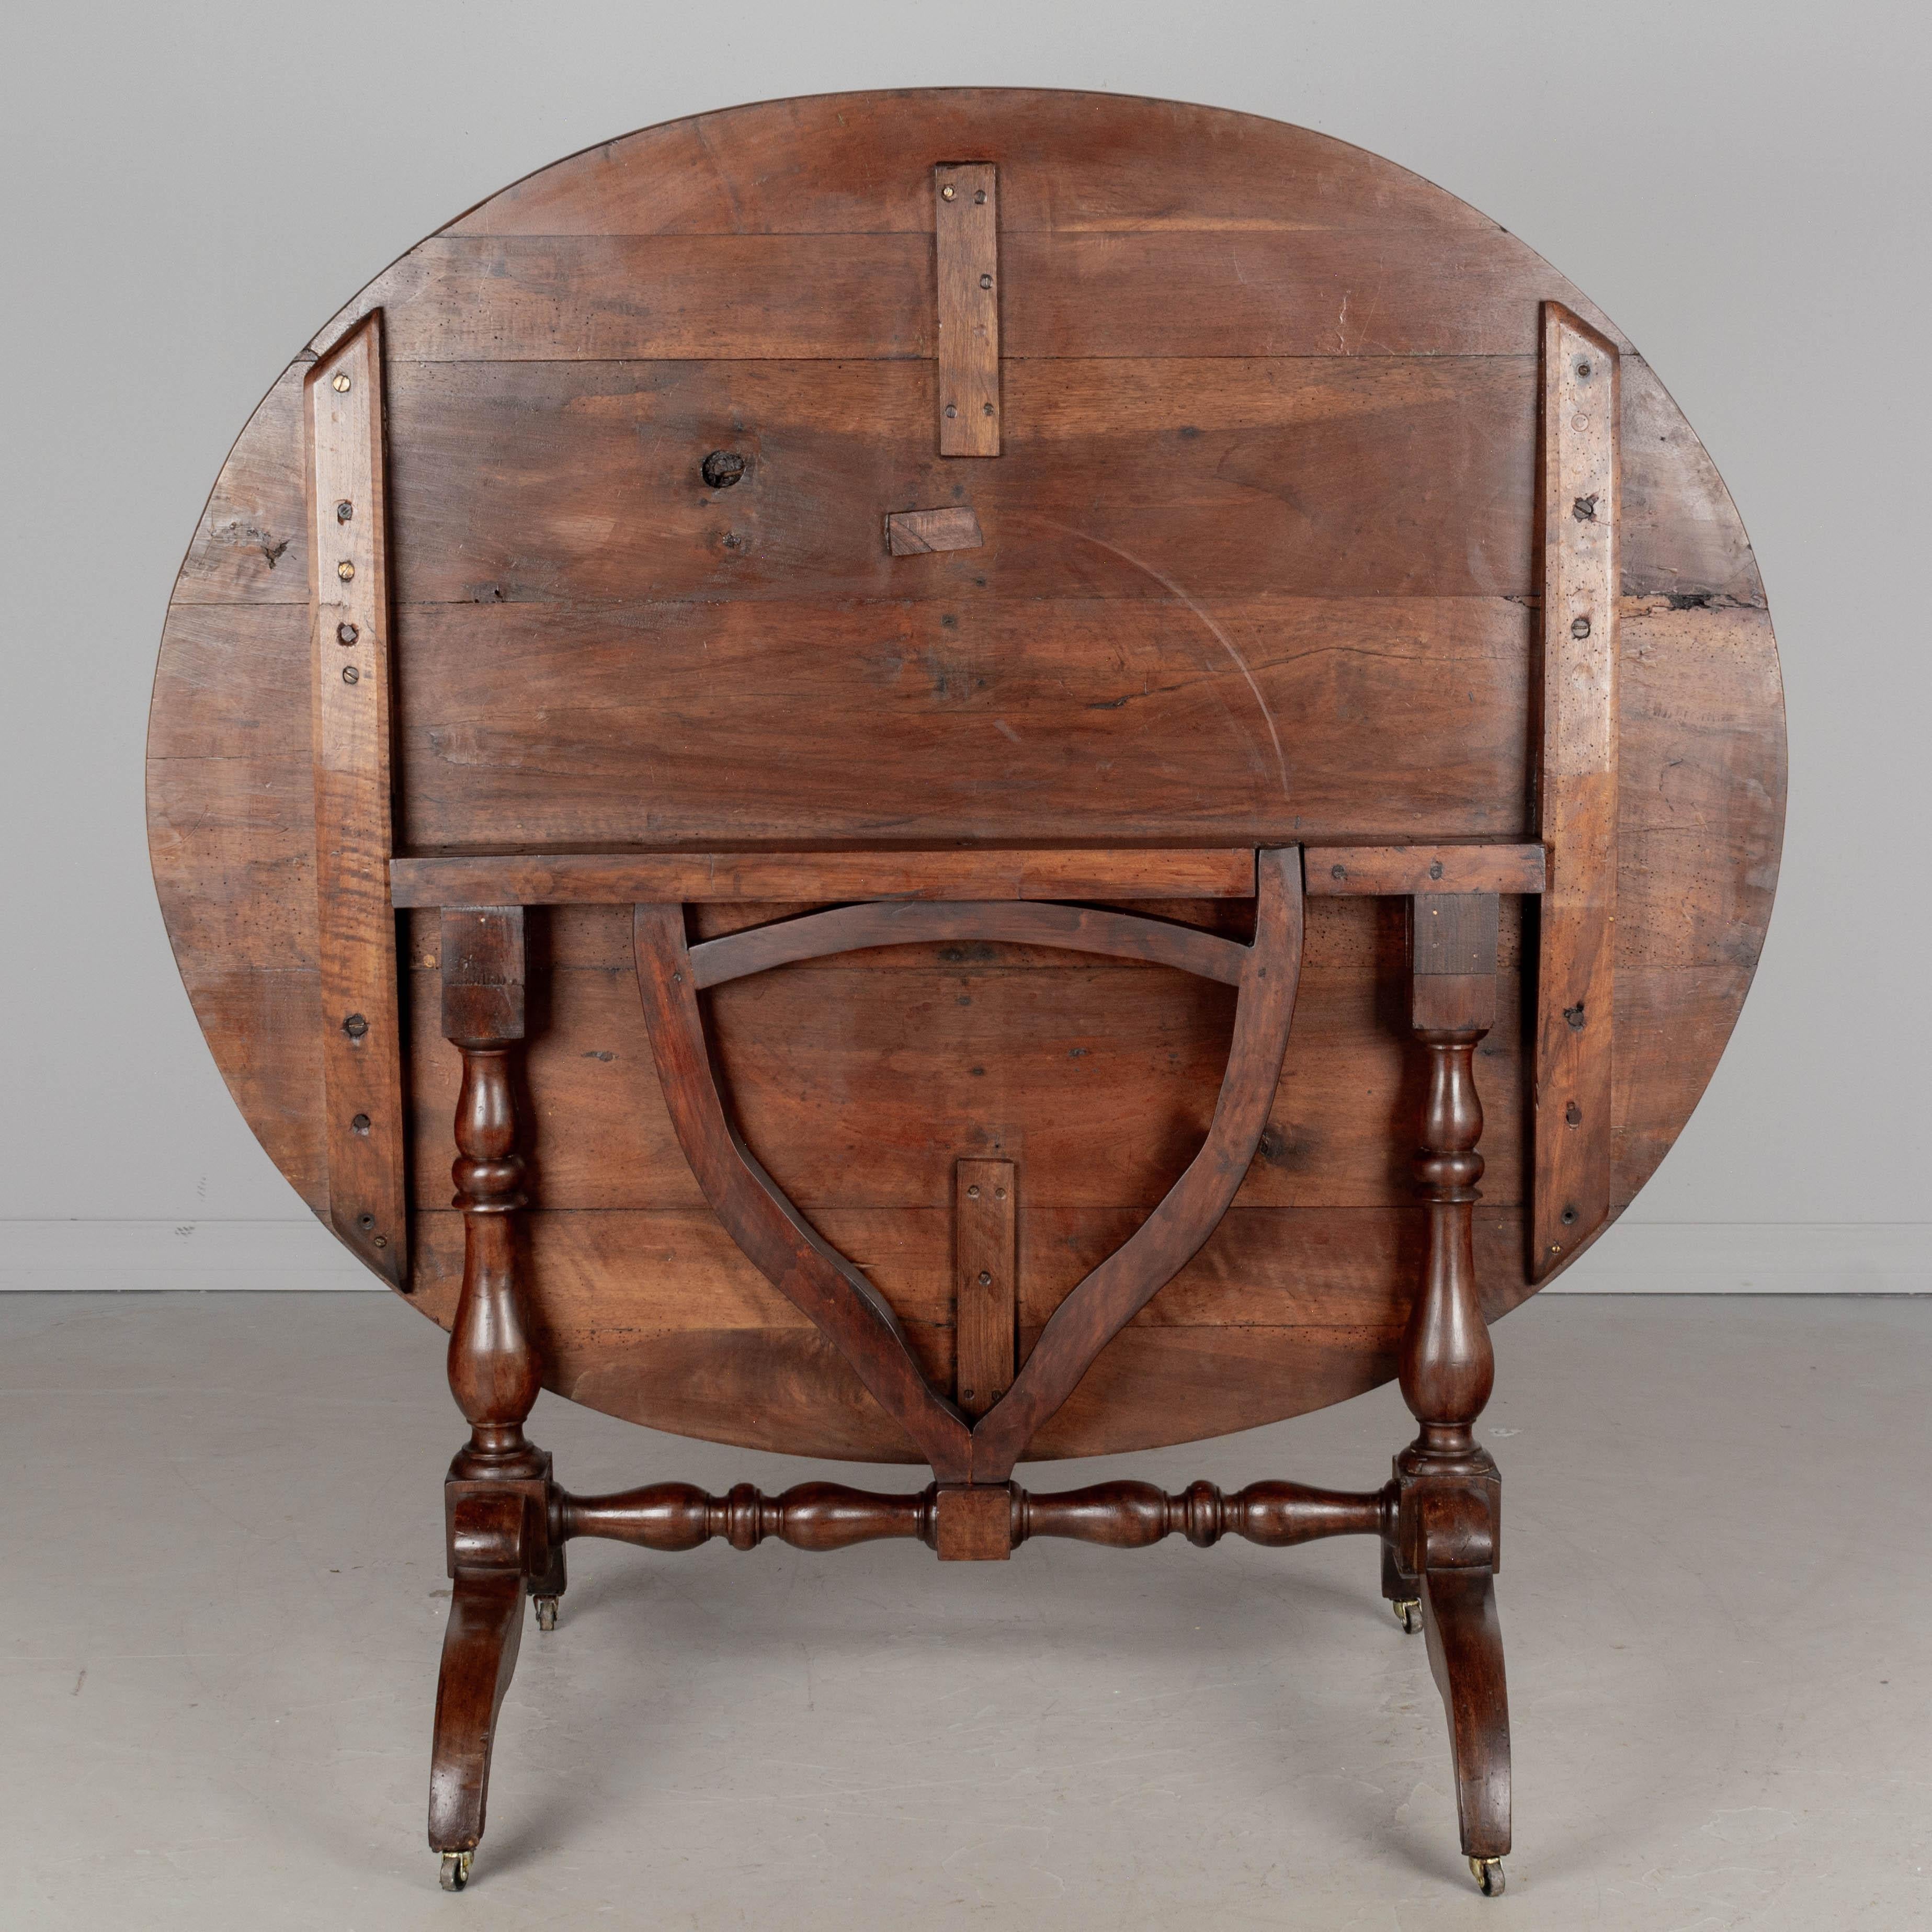 19th Century French Oval Dining Table or Tilt Top Table In Good Condition For Sale In Winter Park, FL